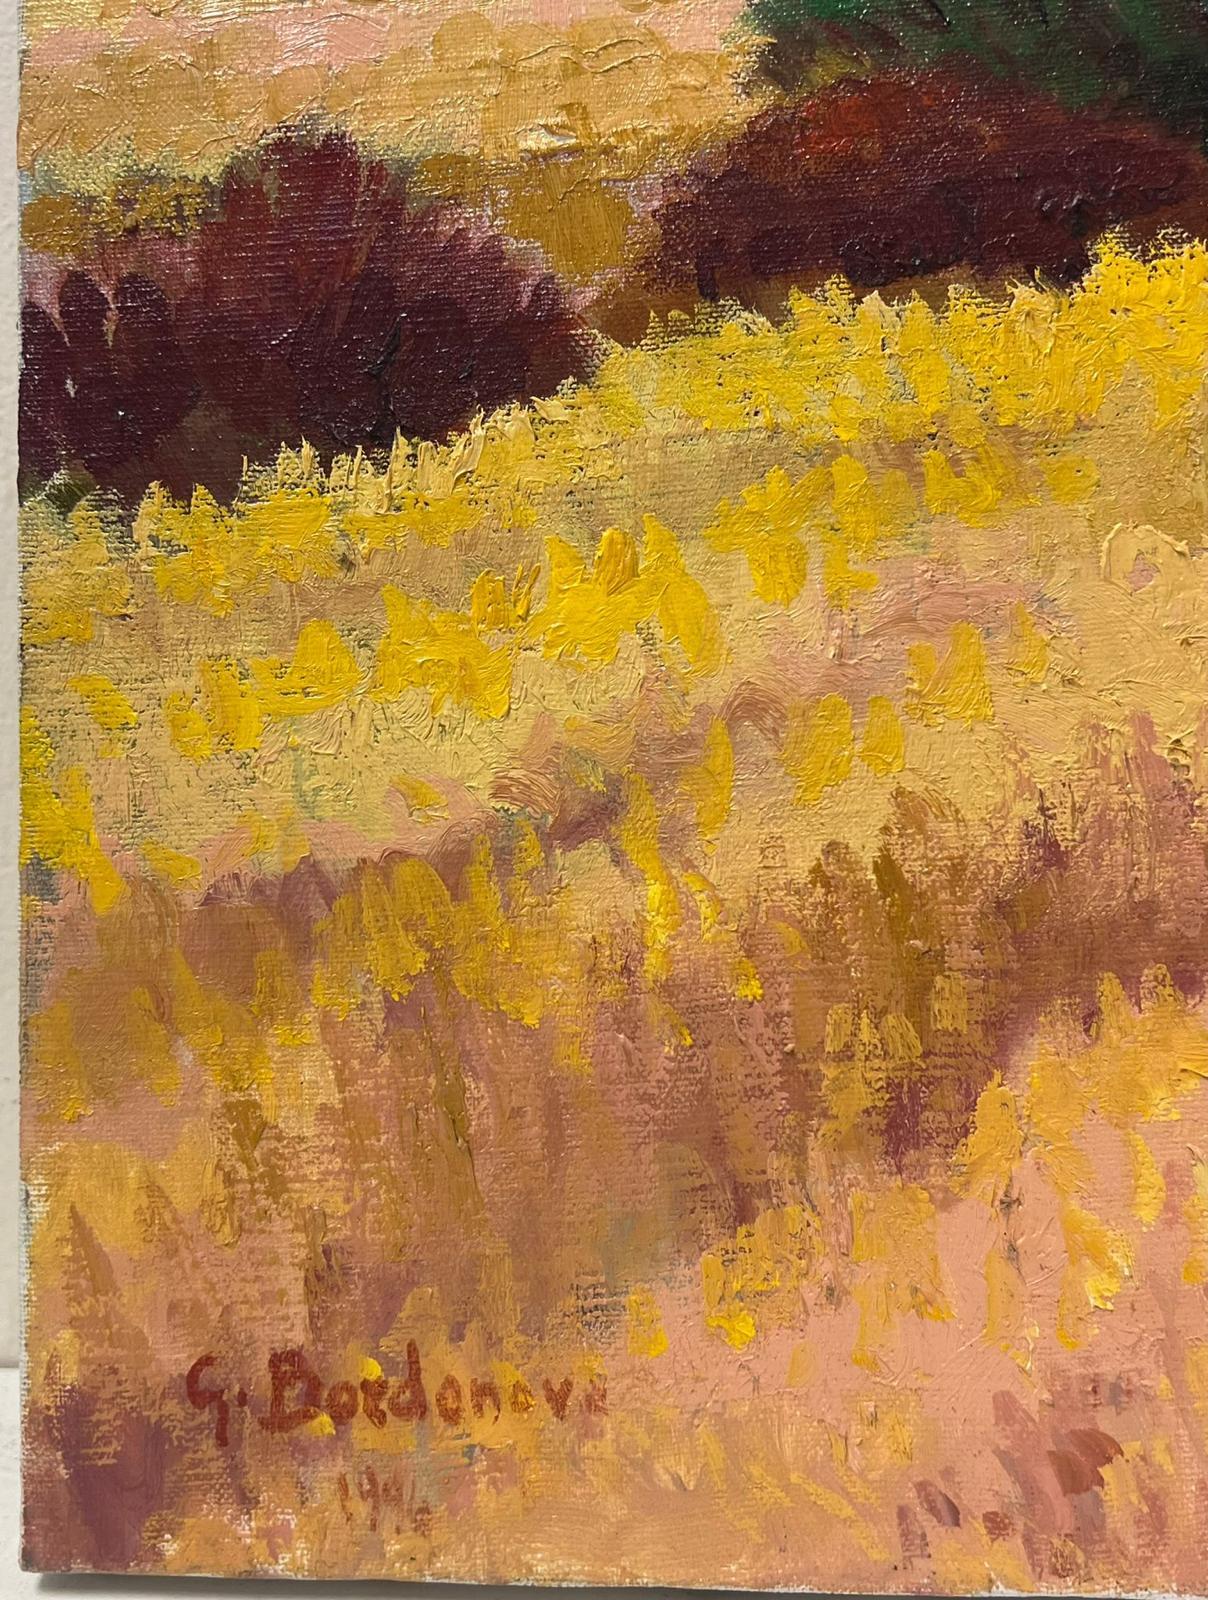 Contemporary French Impressionist Oil Golden Wheat Fields Summer Landscape 3